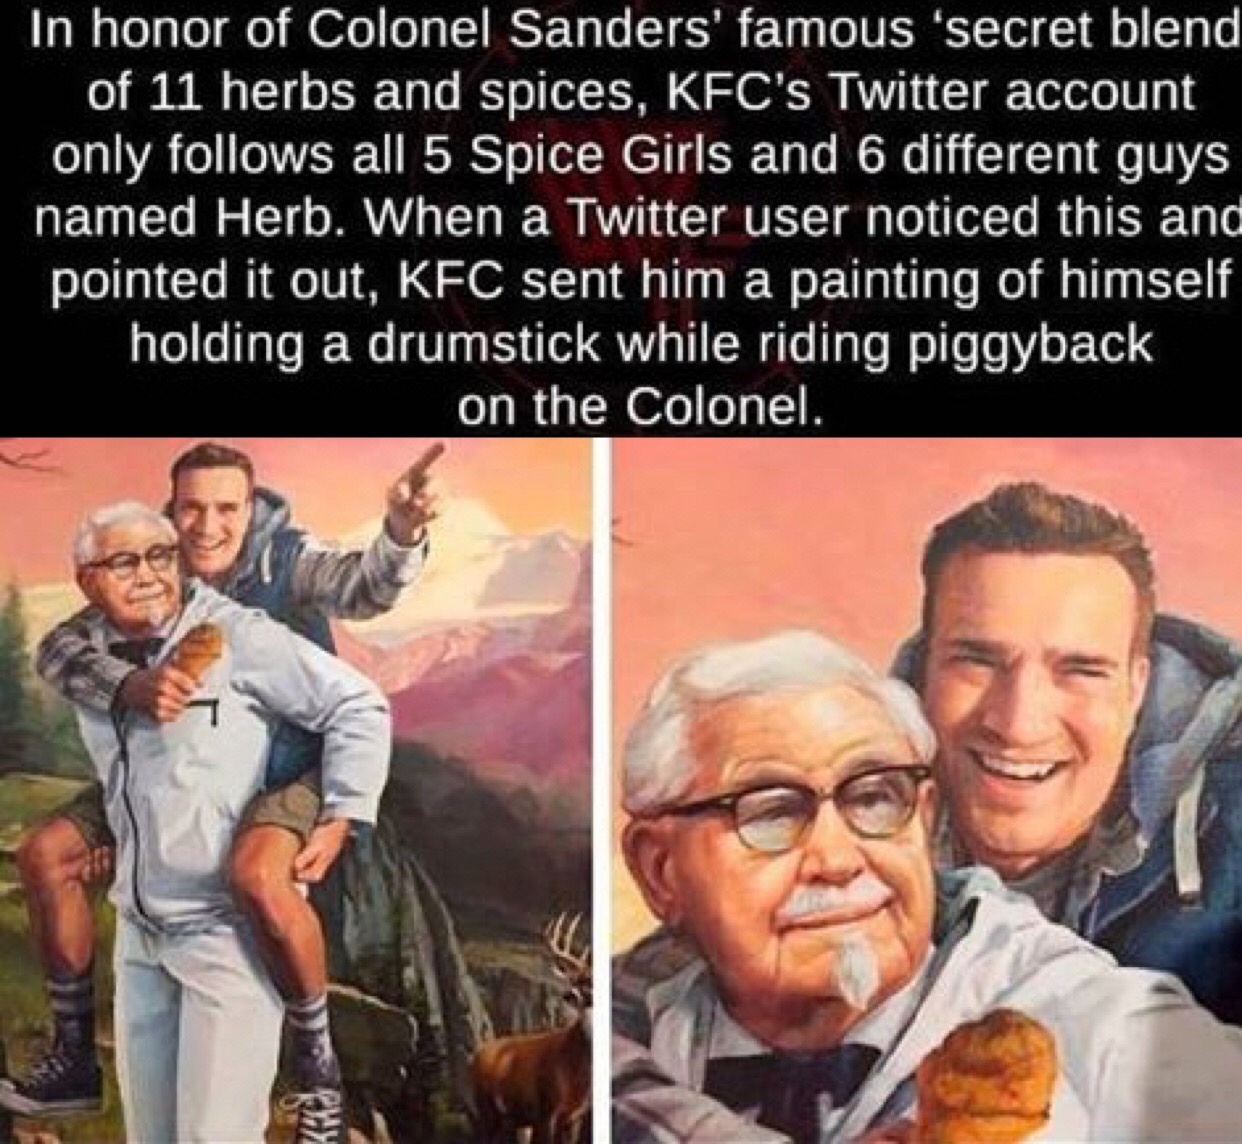 kfc 11 herbs and spices painting - In honor of Colonel Sanders' famous 'secret blend of 11 herbs and spices, Kfc's Twitter account only s all 5 Spice Girls and 6 different guys named Herb. When a Twitter user noticed this and pointed it out, Kfc sent him 